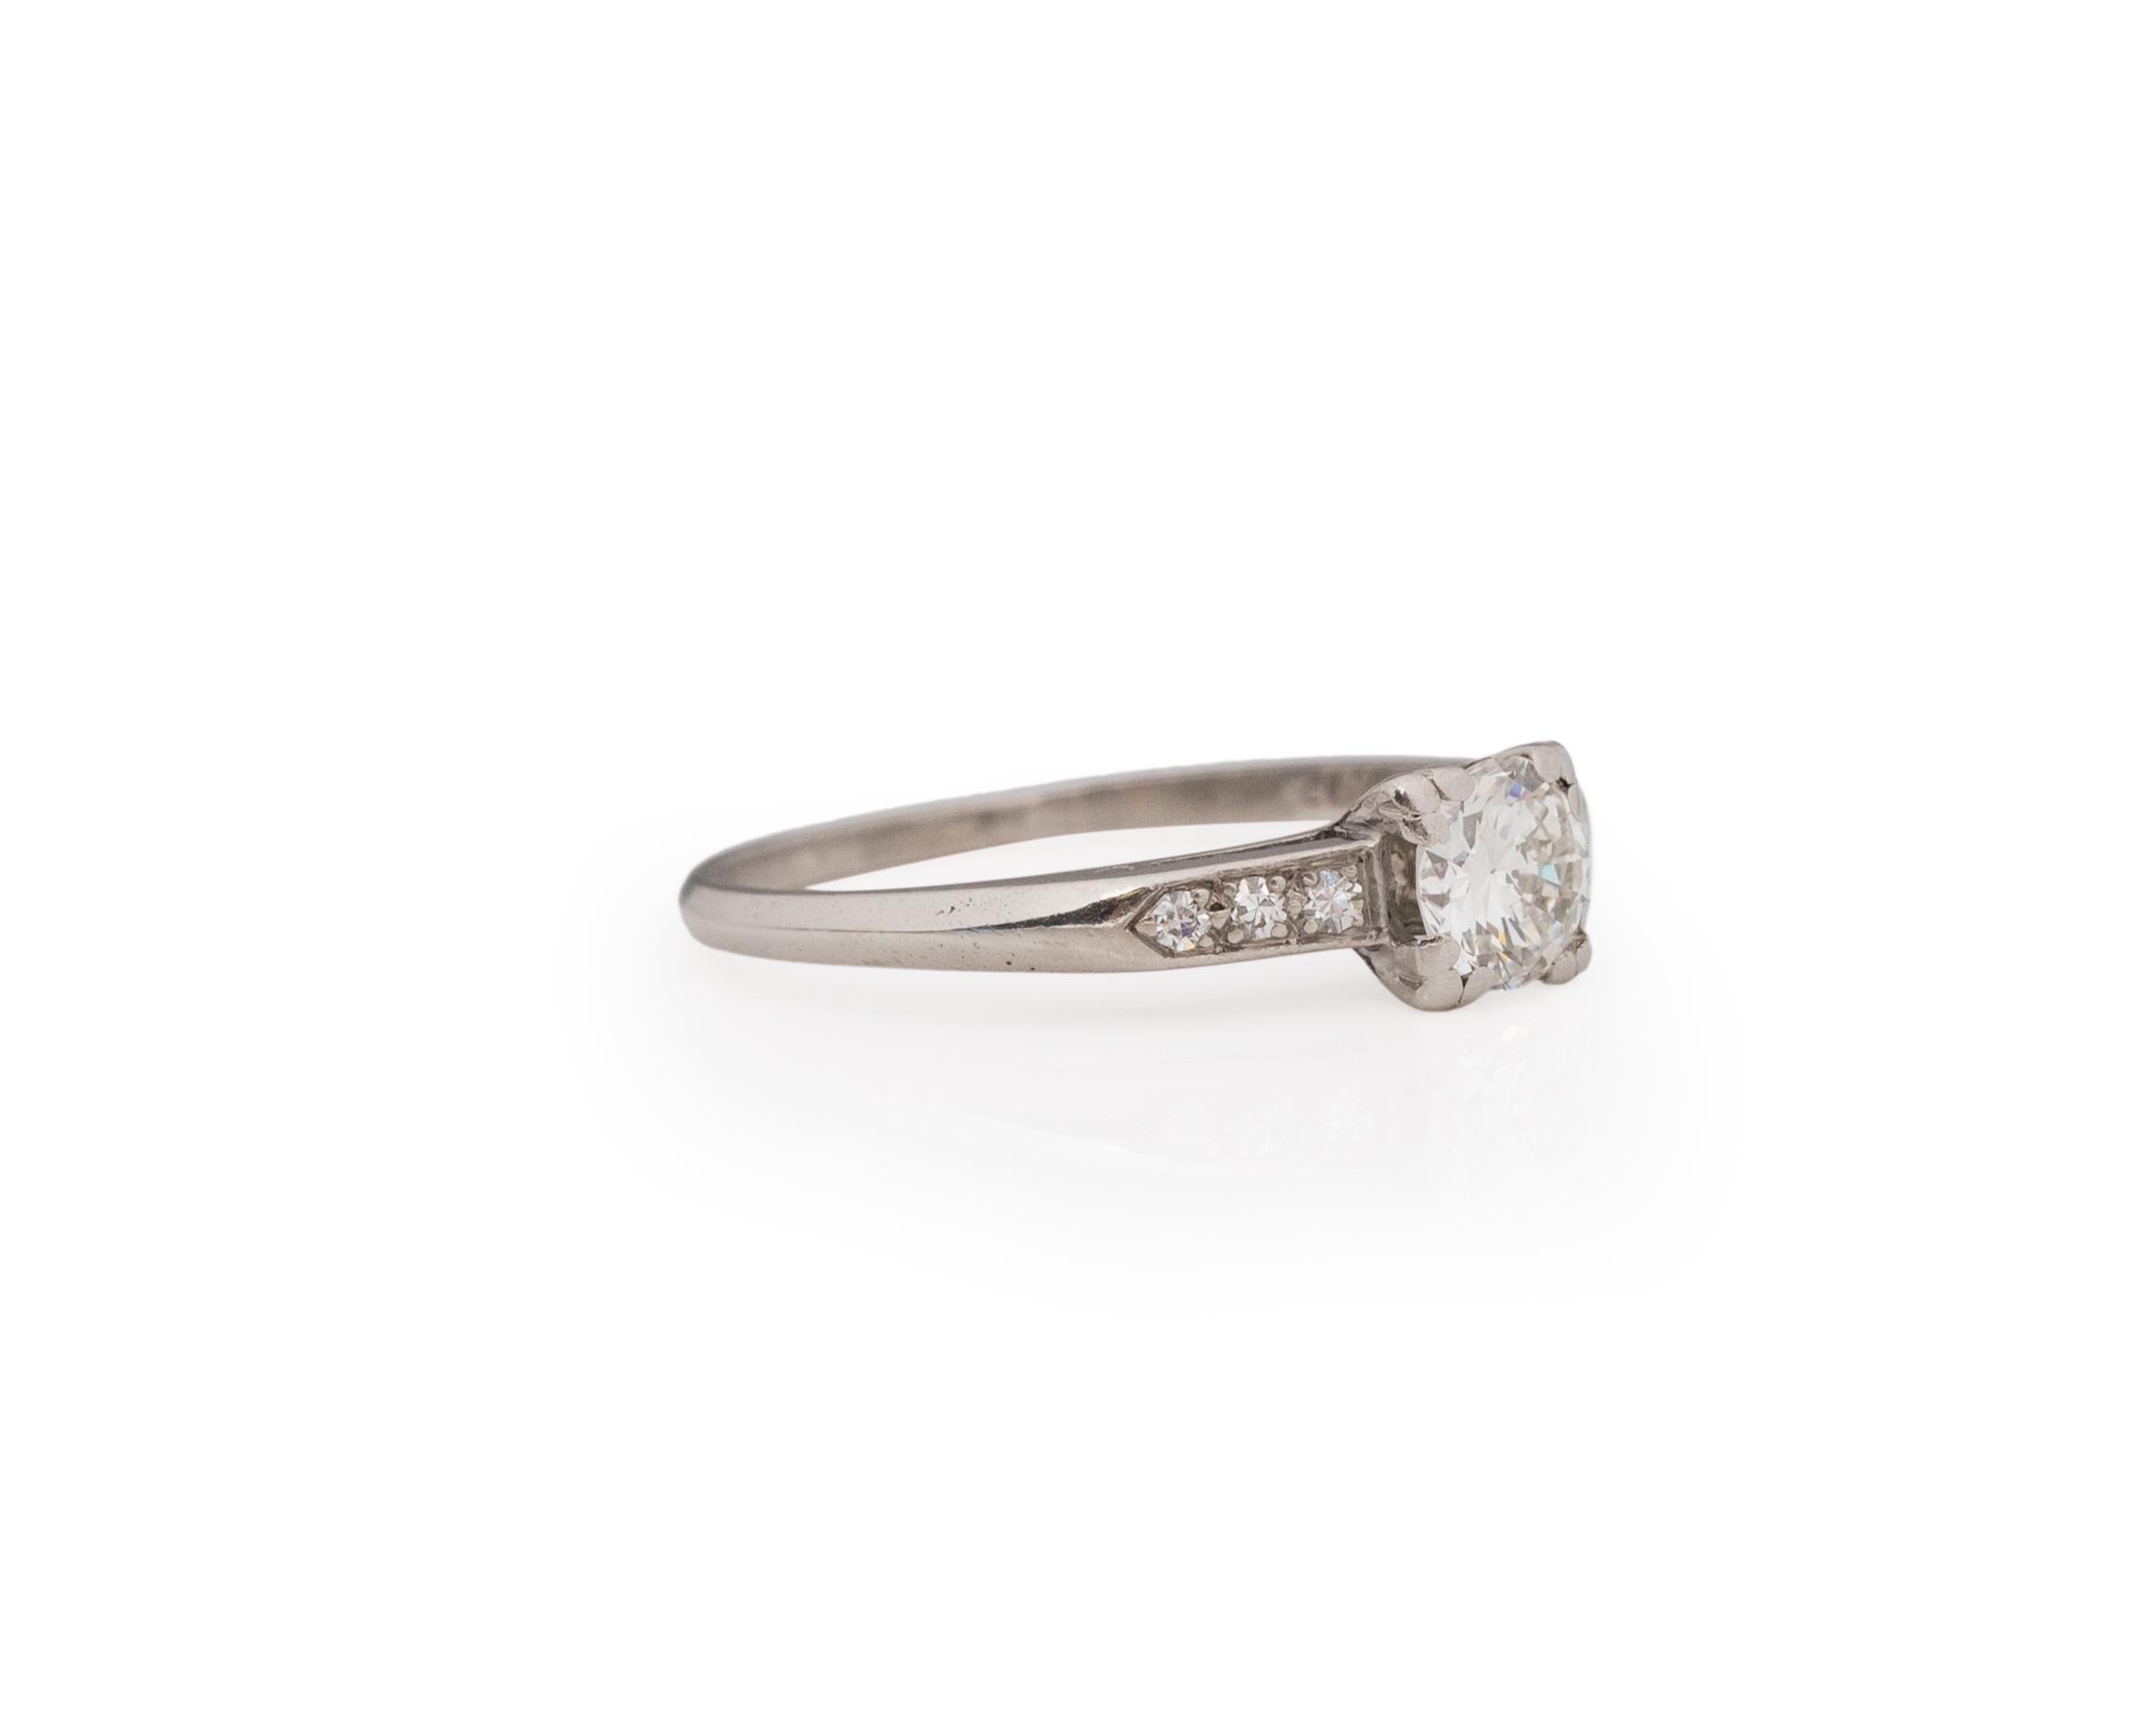 Ring Size: 7
Metal Type: Platinum [Hallmarked, and Tested]
Weight: 1.80 grams

Center Diamond Details:
Weight: .55ct
Cut: Old European brilliant, transitional cut
Color: E
Clarity: VS

Finger to Top of Stone Measurement: 5mm
Condition: Excellent